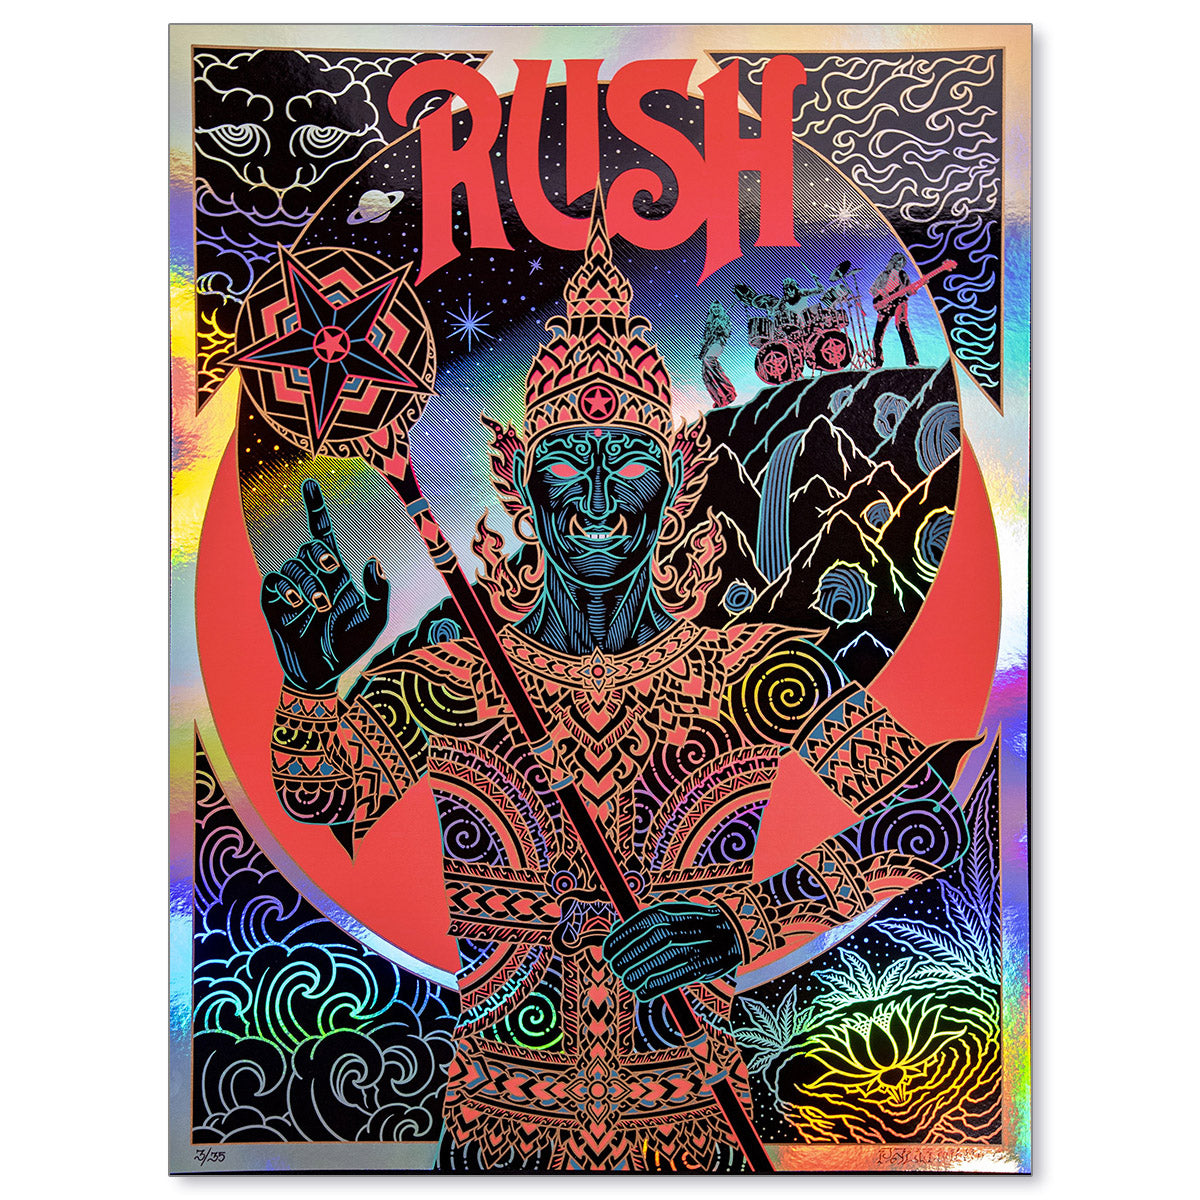 Rush - 2112: II. 'The Temples of Syrinx' by Palehorse (Astral Nights Variant)